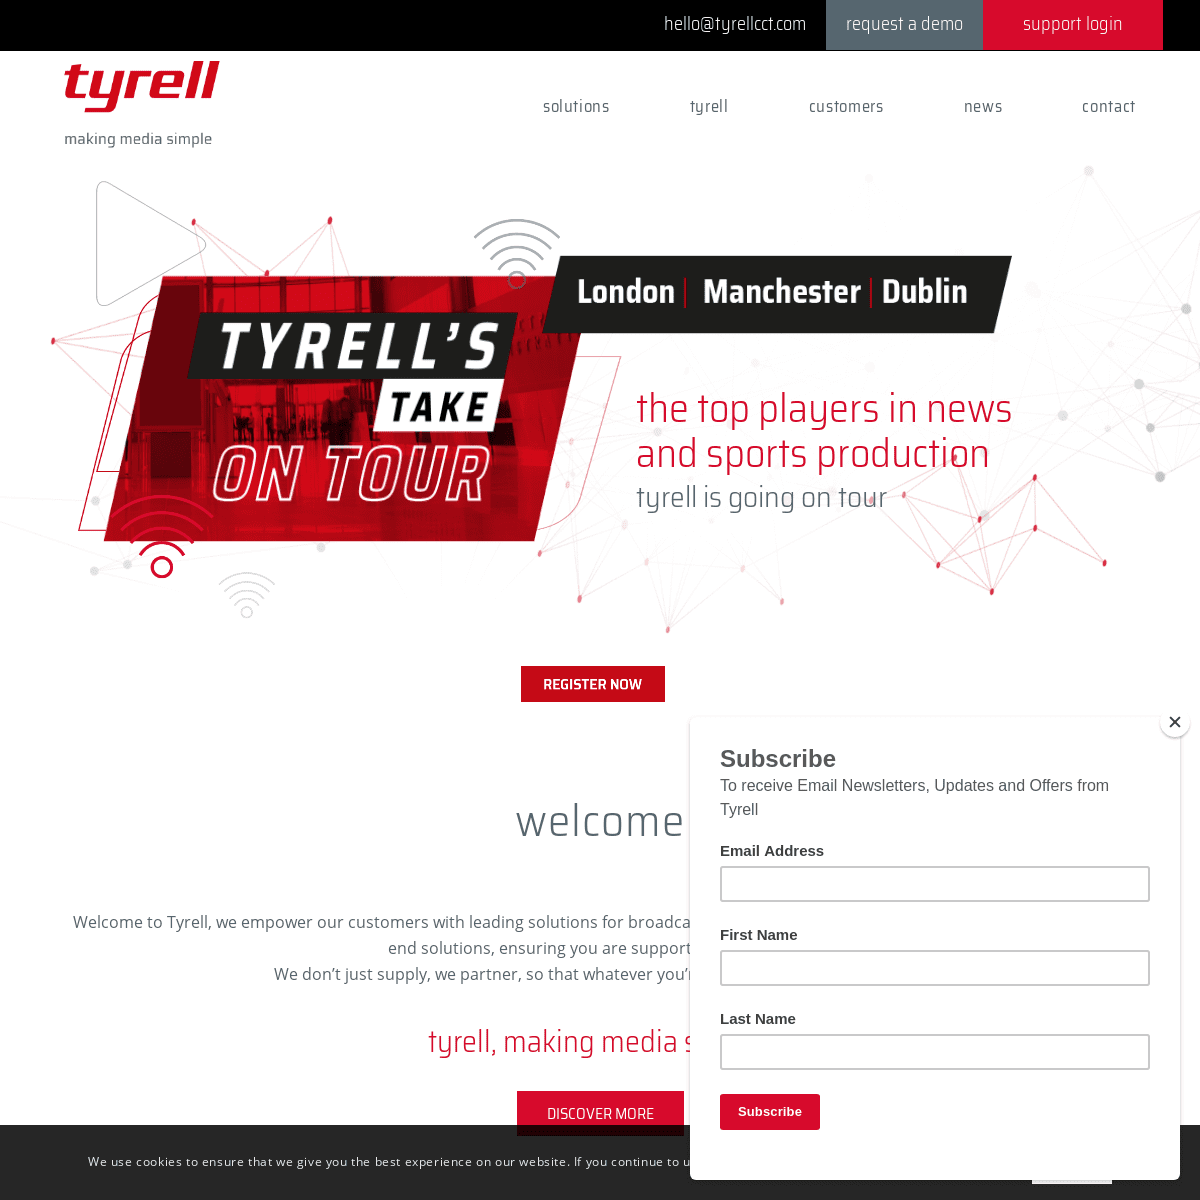 A complete backup of tyrellcct.com